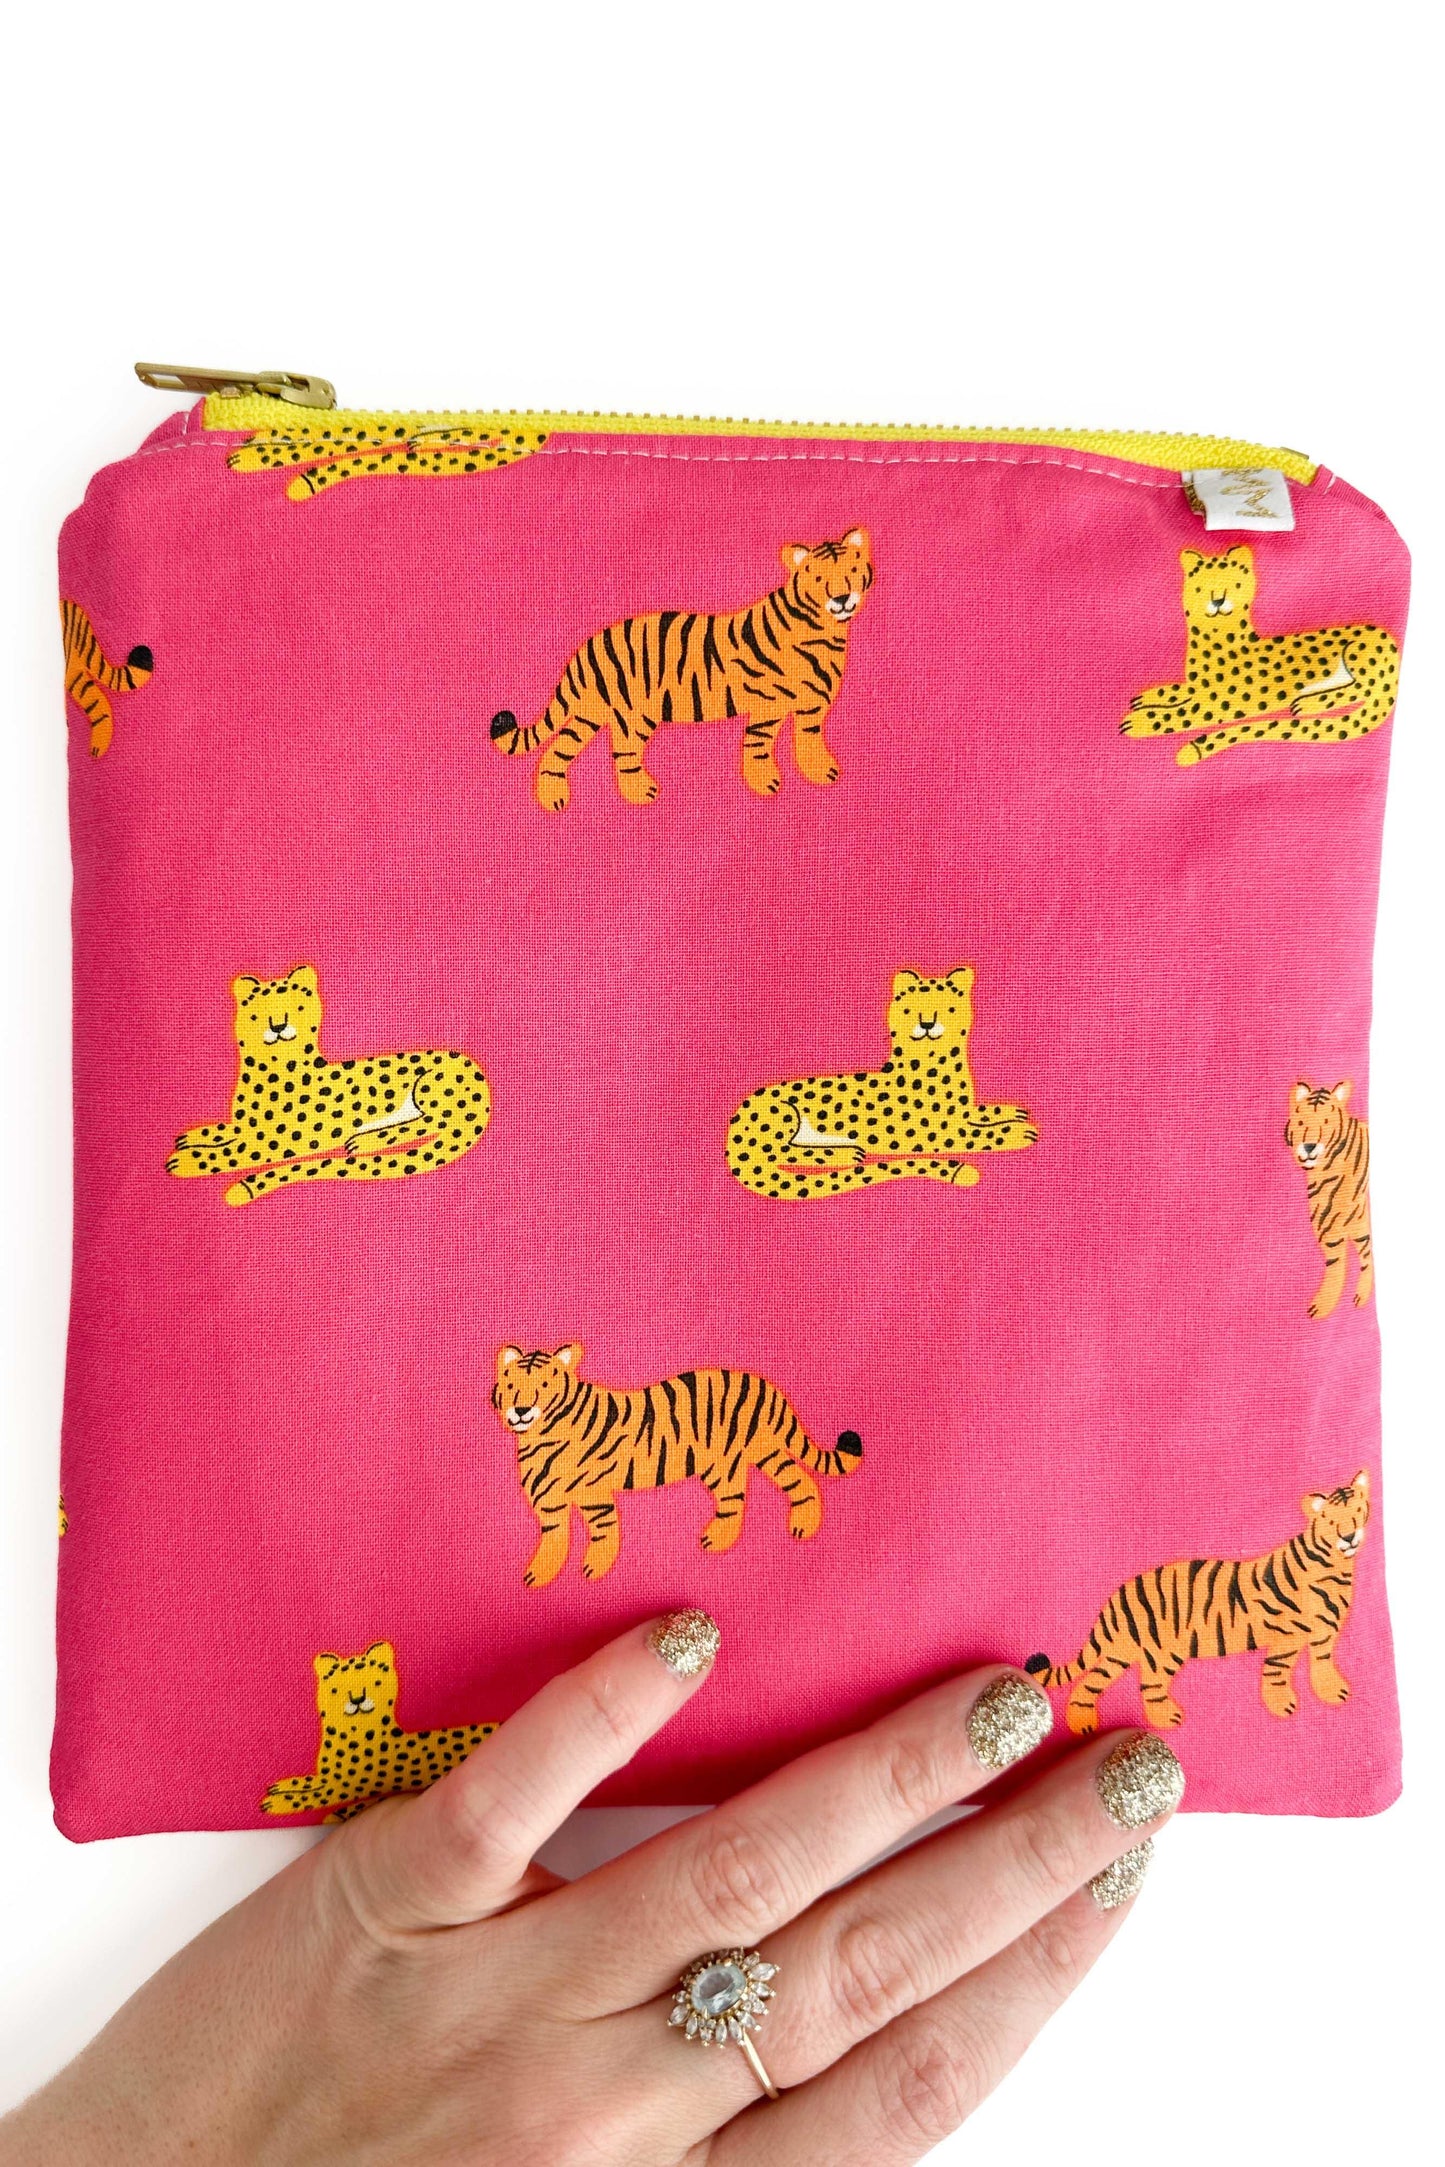 Wildcats Small Wet Bag READY TO SHIP - Modern Makerie